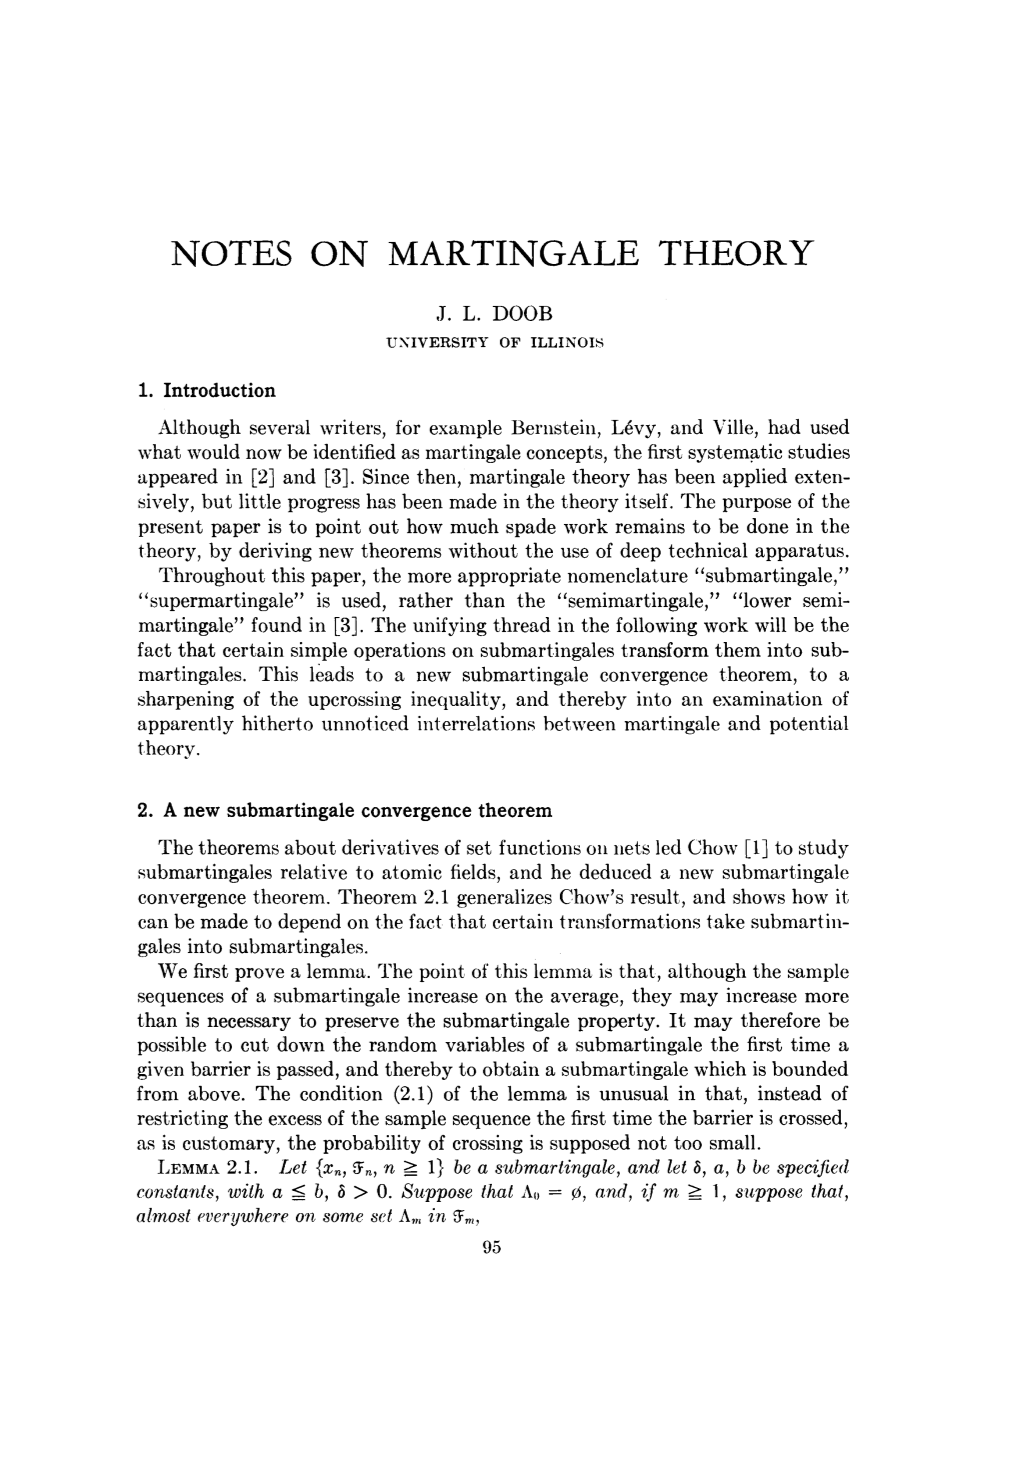 Notes on Martingale Theory